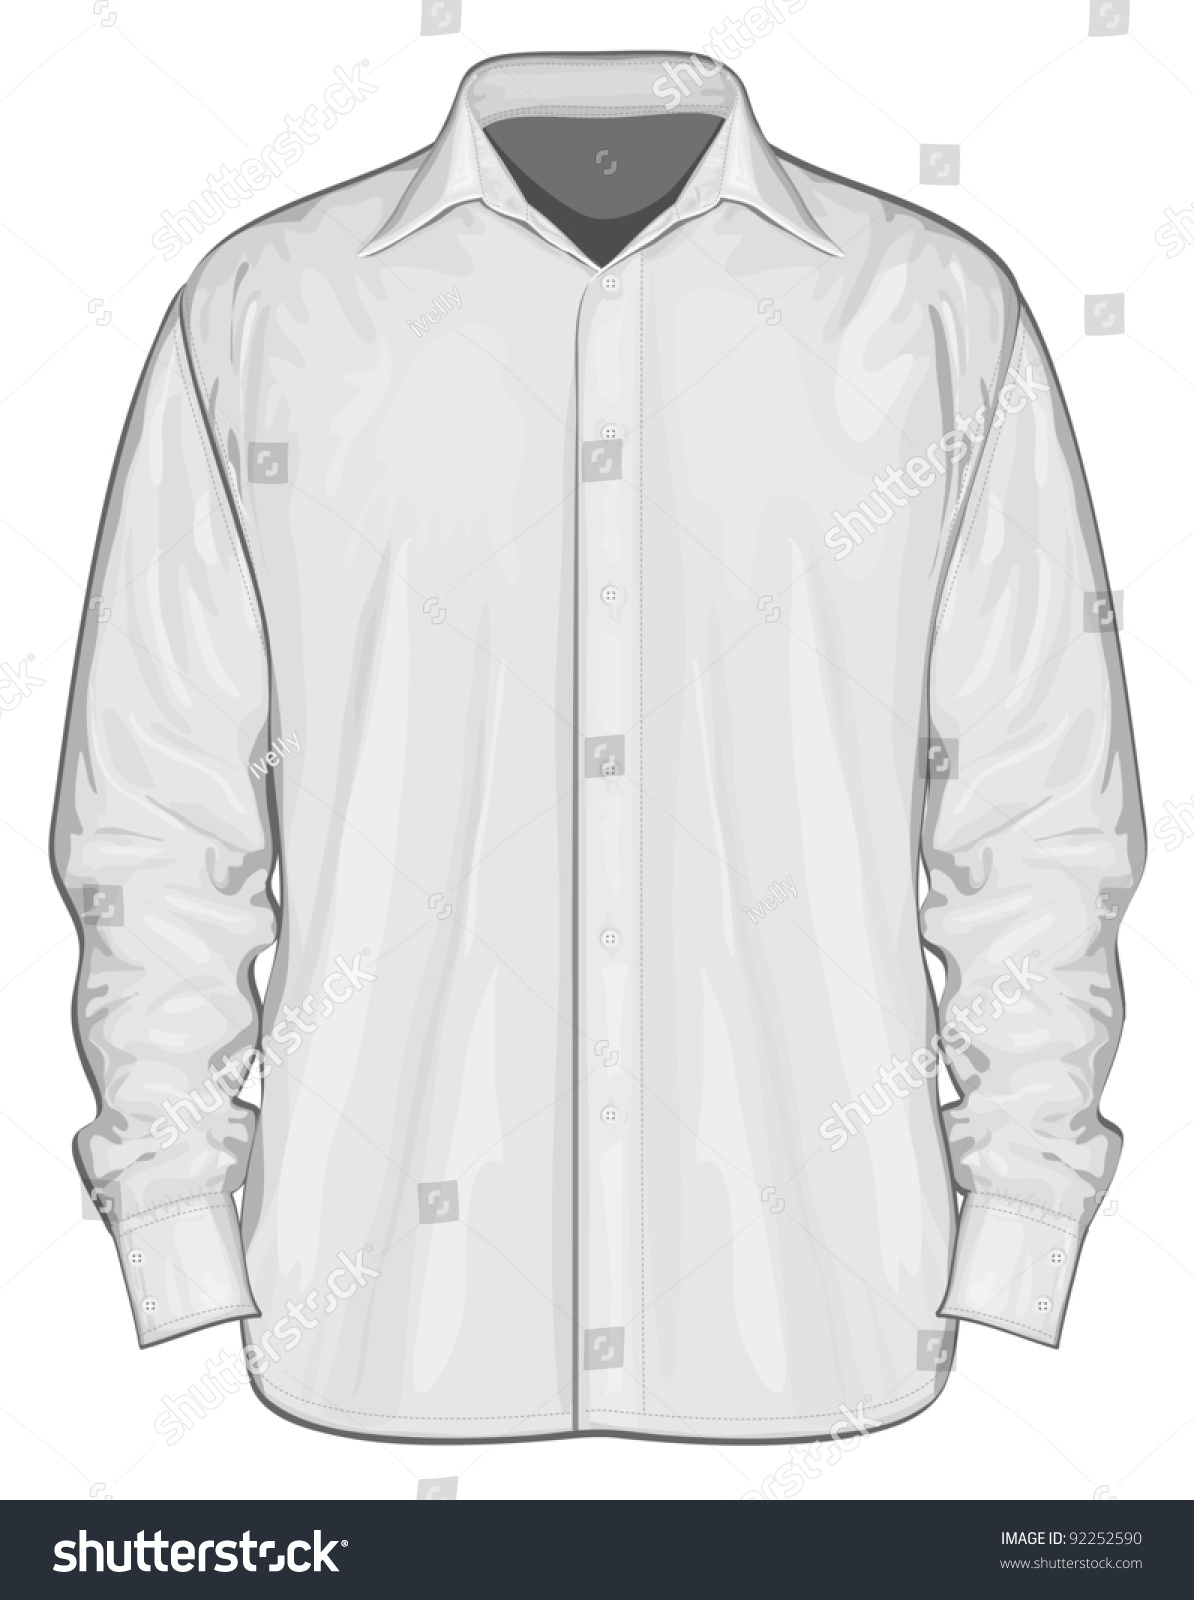 Vector Illustration Of Dress Shirt (Button-Down). Front View - 92252590 ...